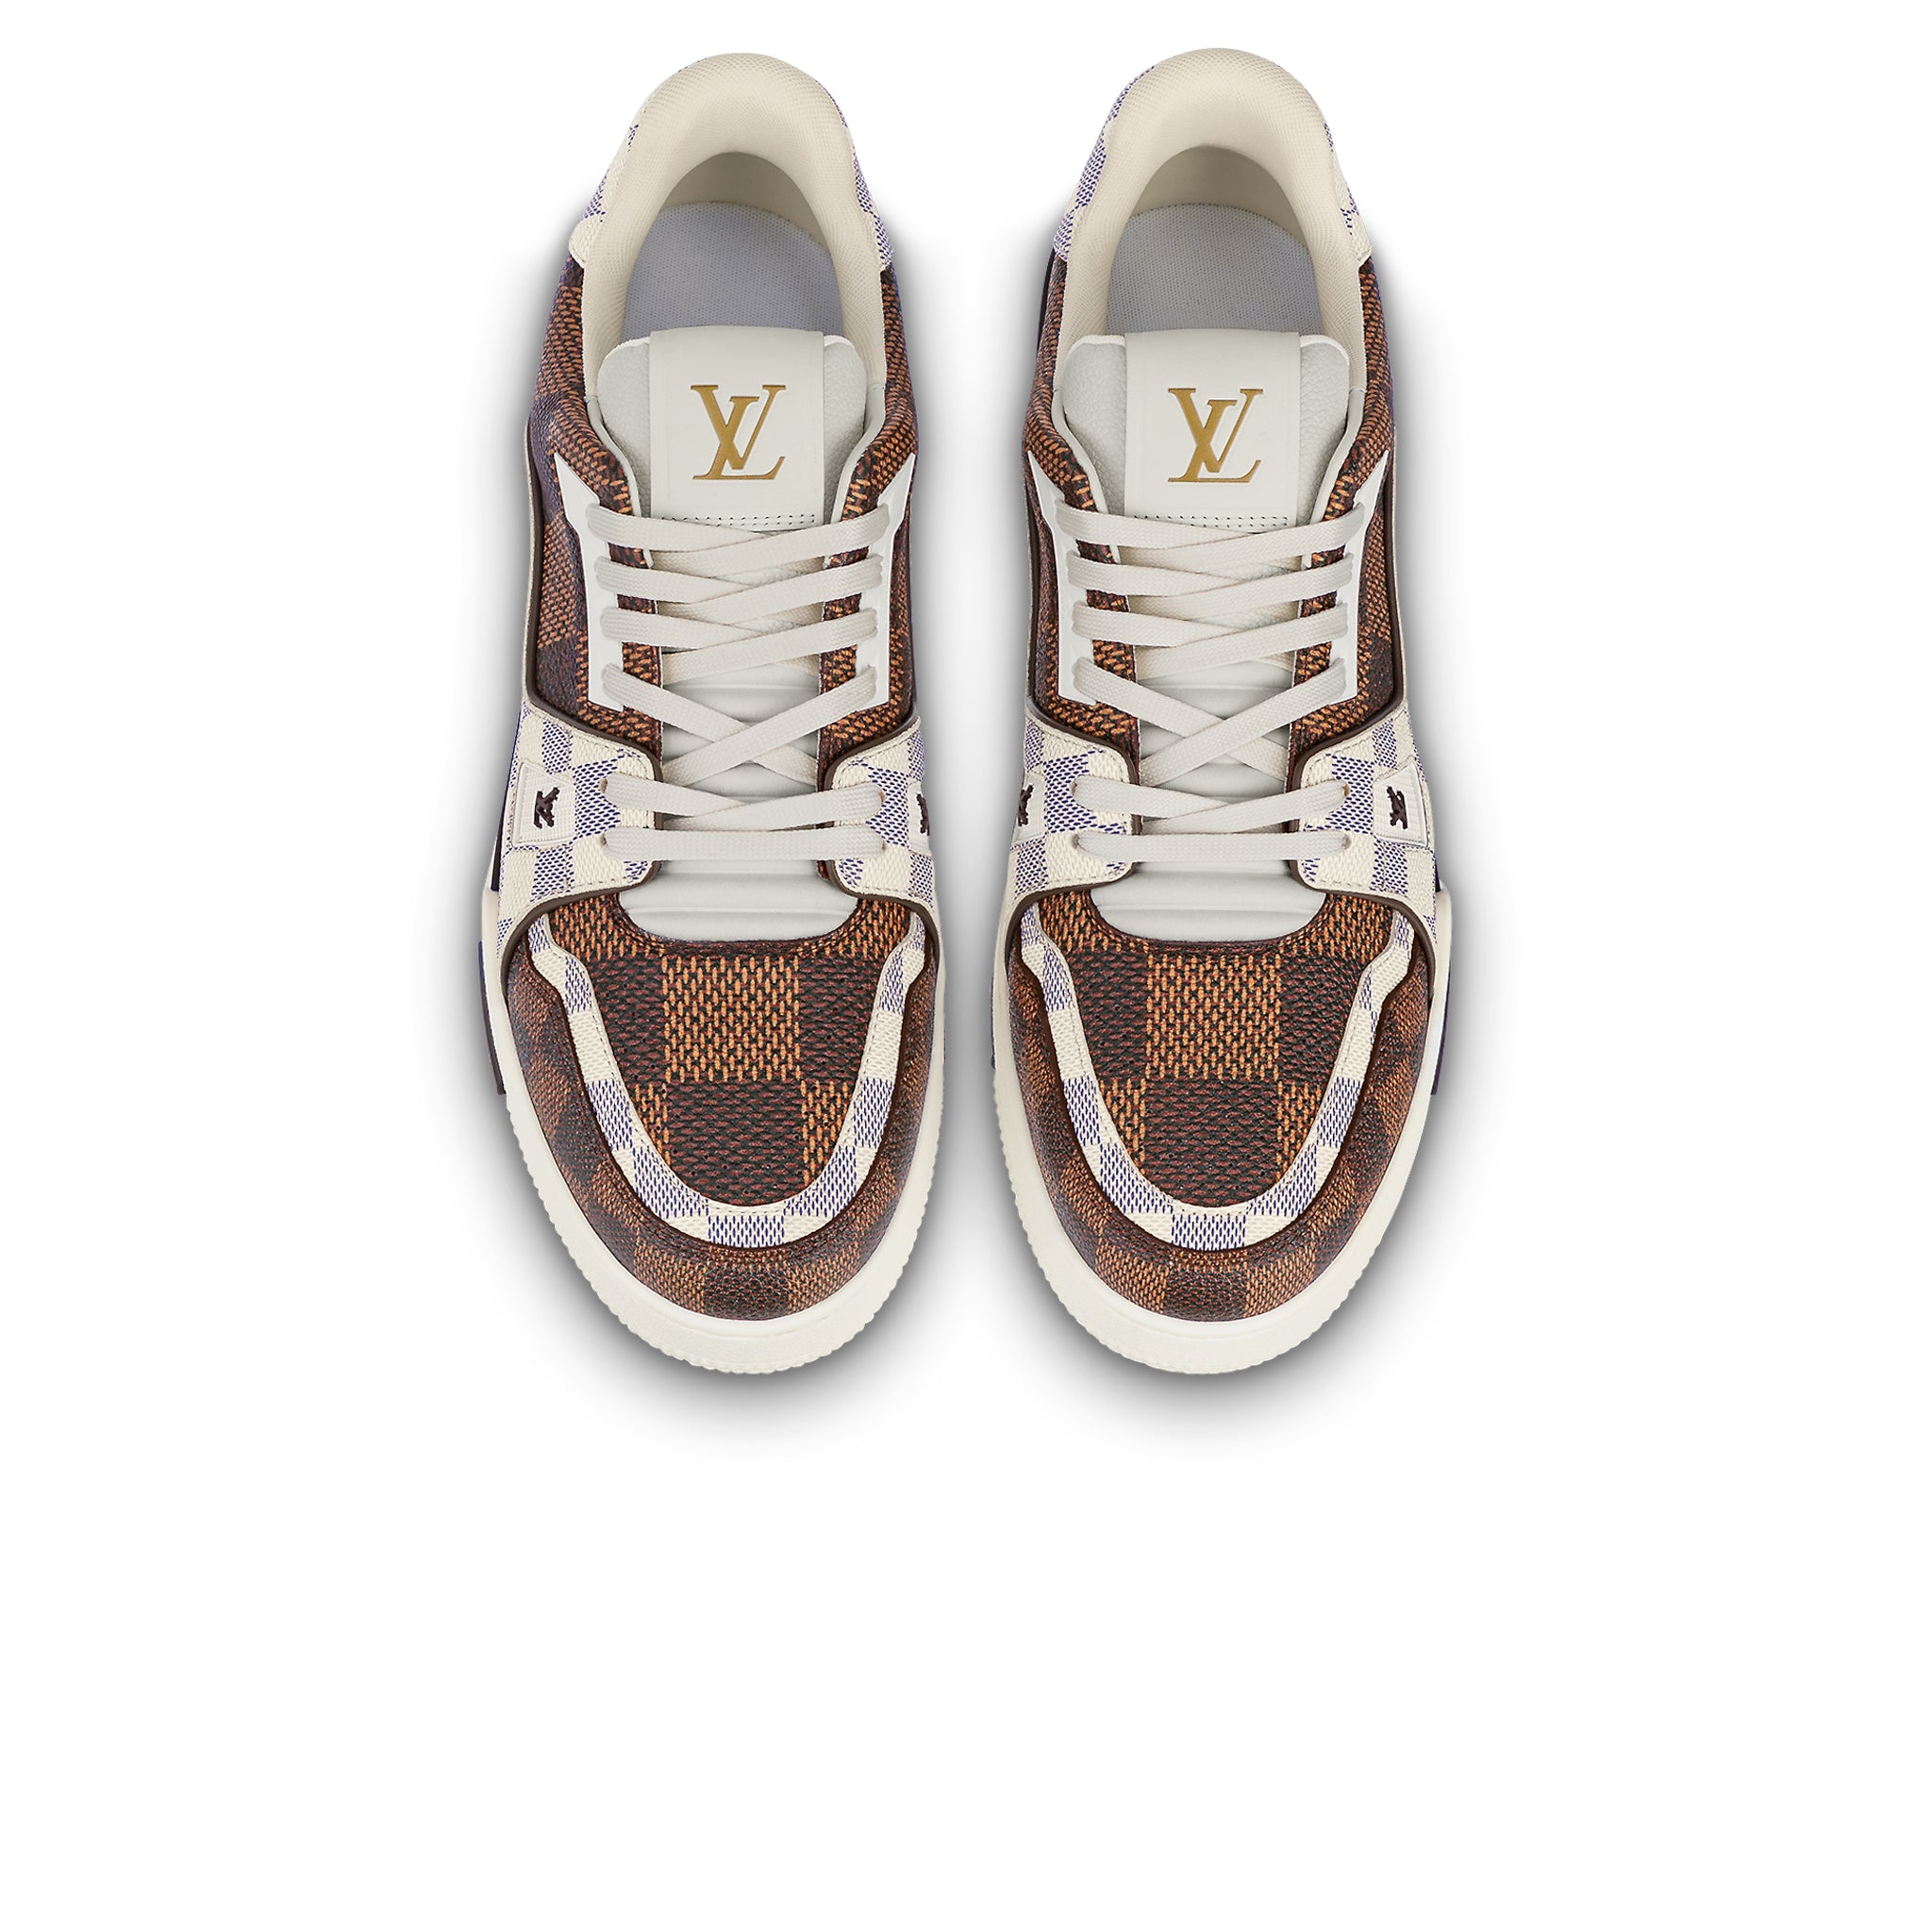 Run away leather low trainers Louis Vuitton Brown size 42.5 EU in